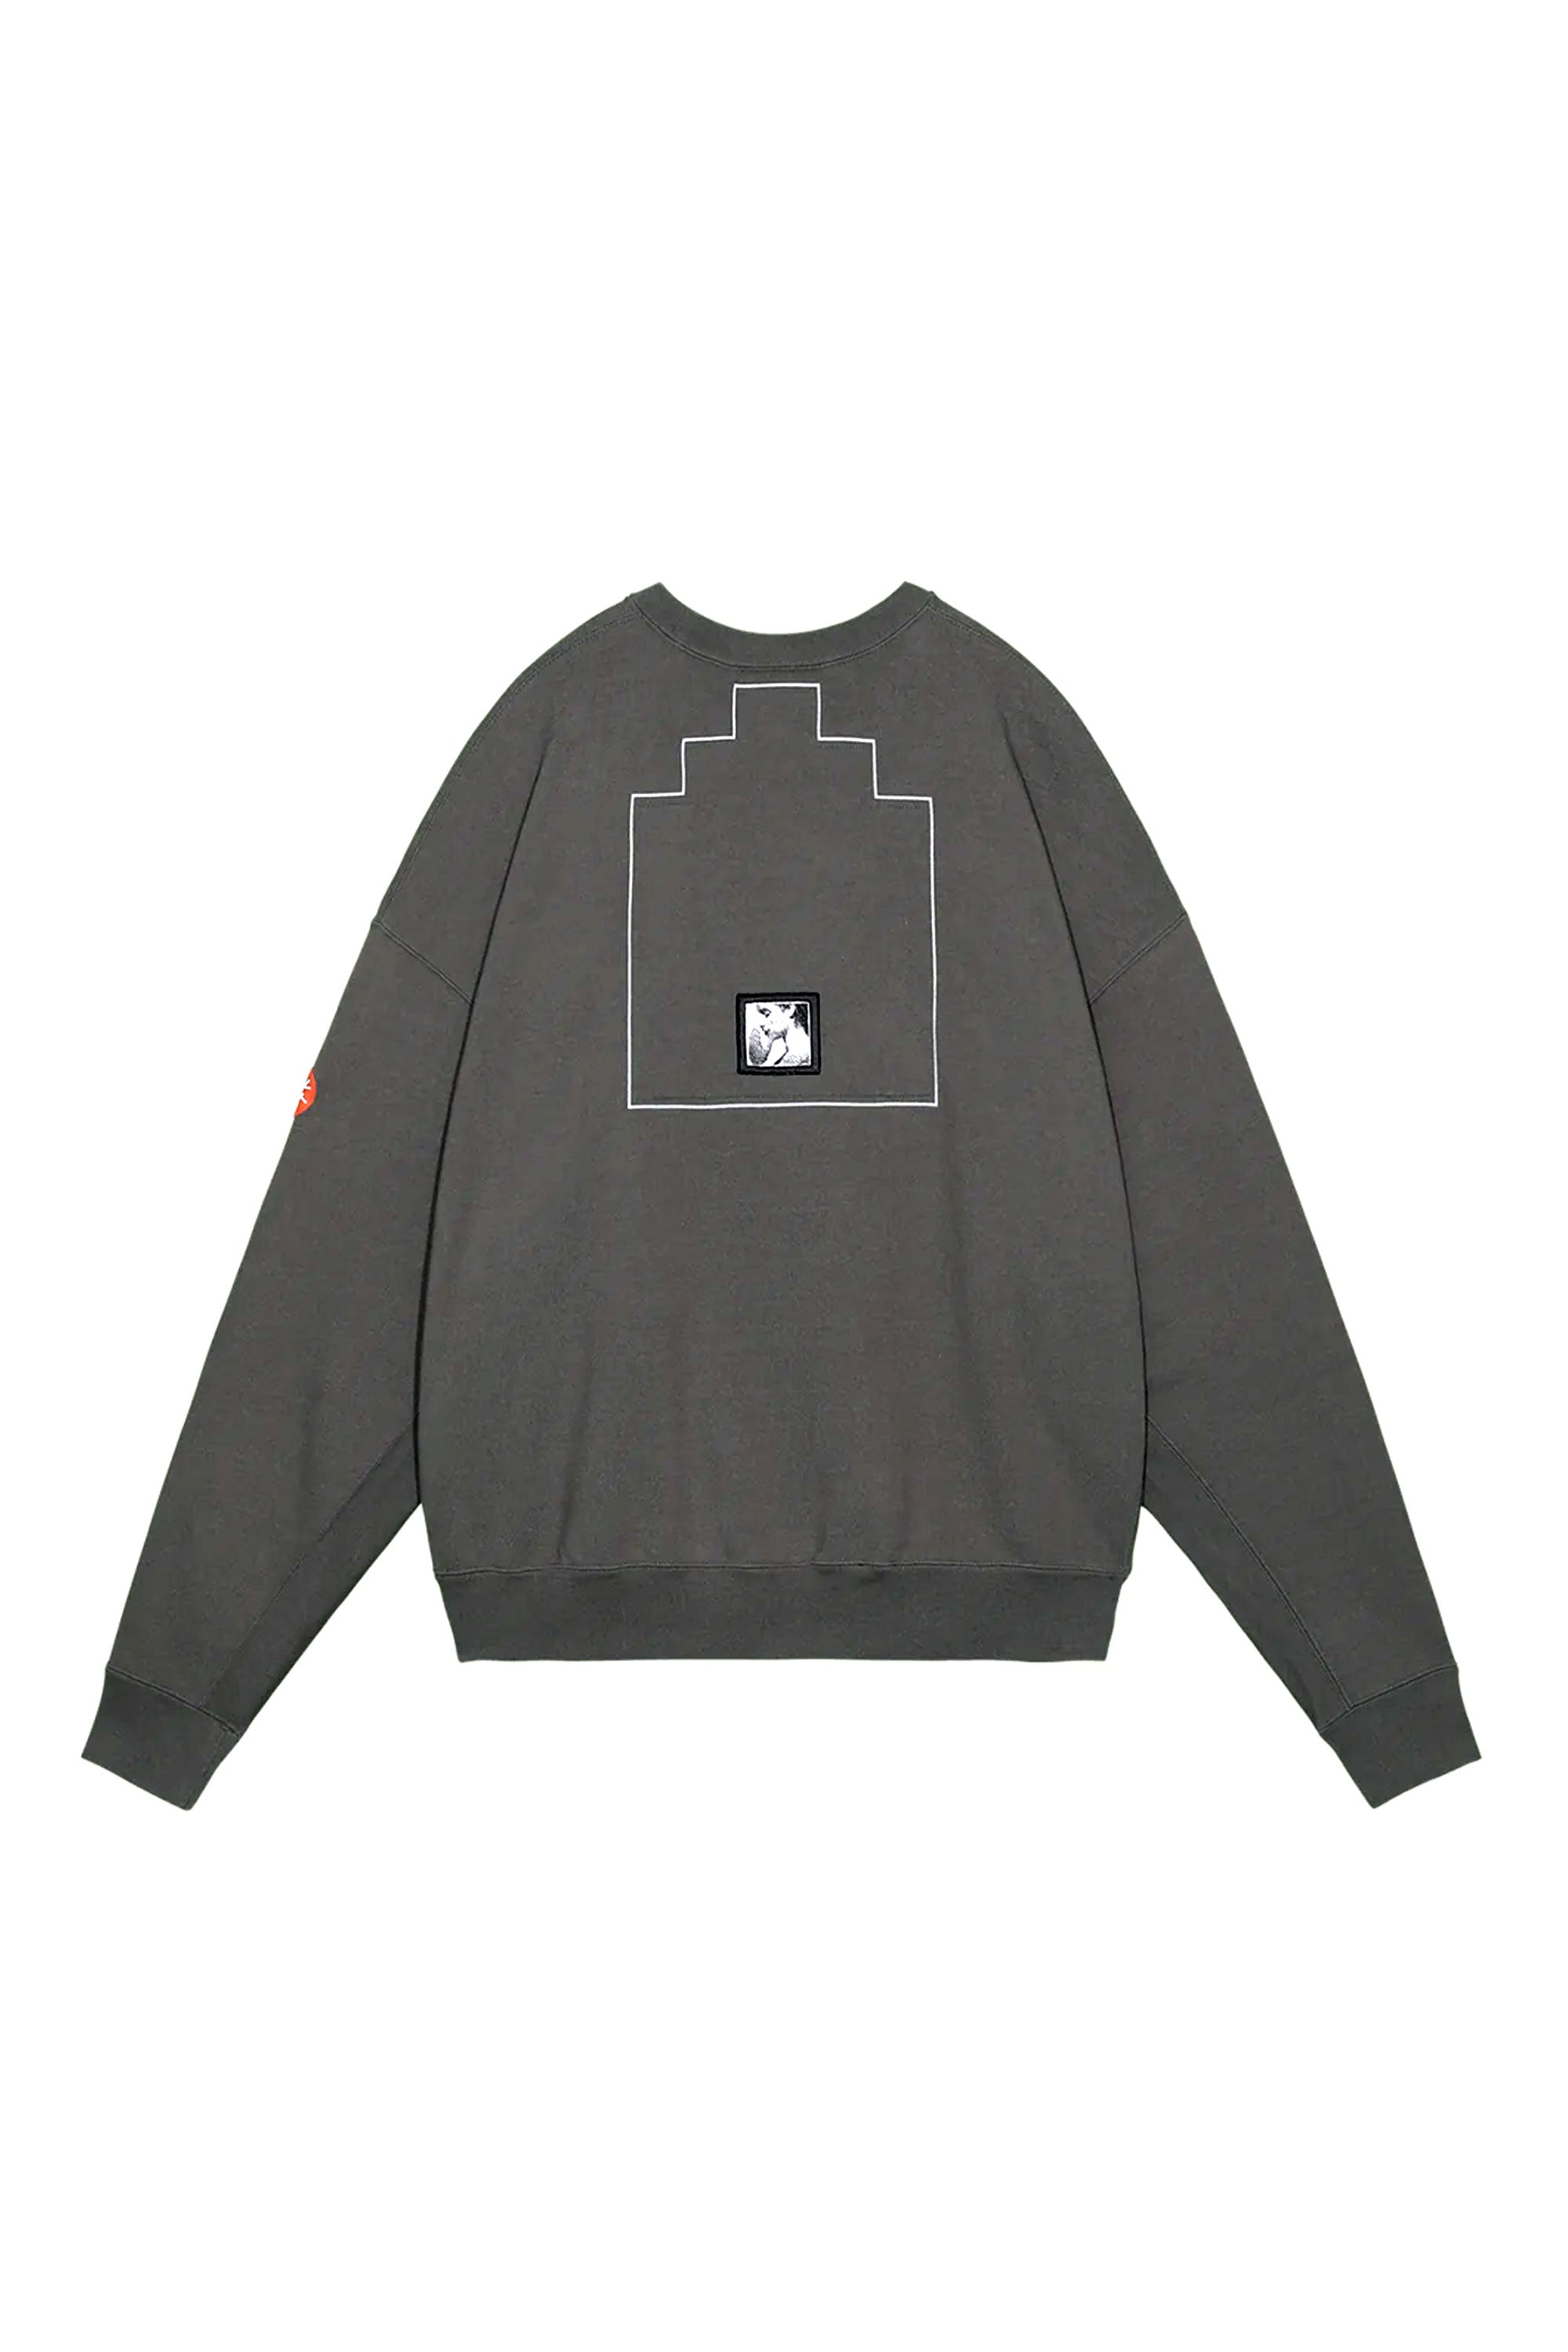 The CAV EMPT - ZIG MODEL CREW NECK  available online with global shipping, and in PAM Stores Melbourne and Sydney.